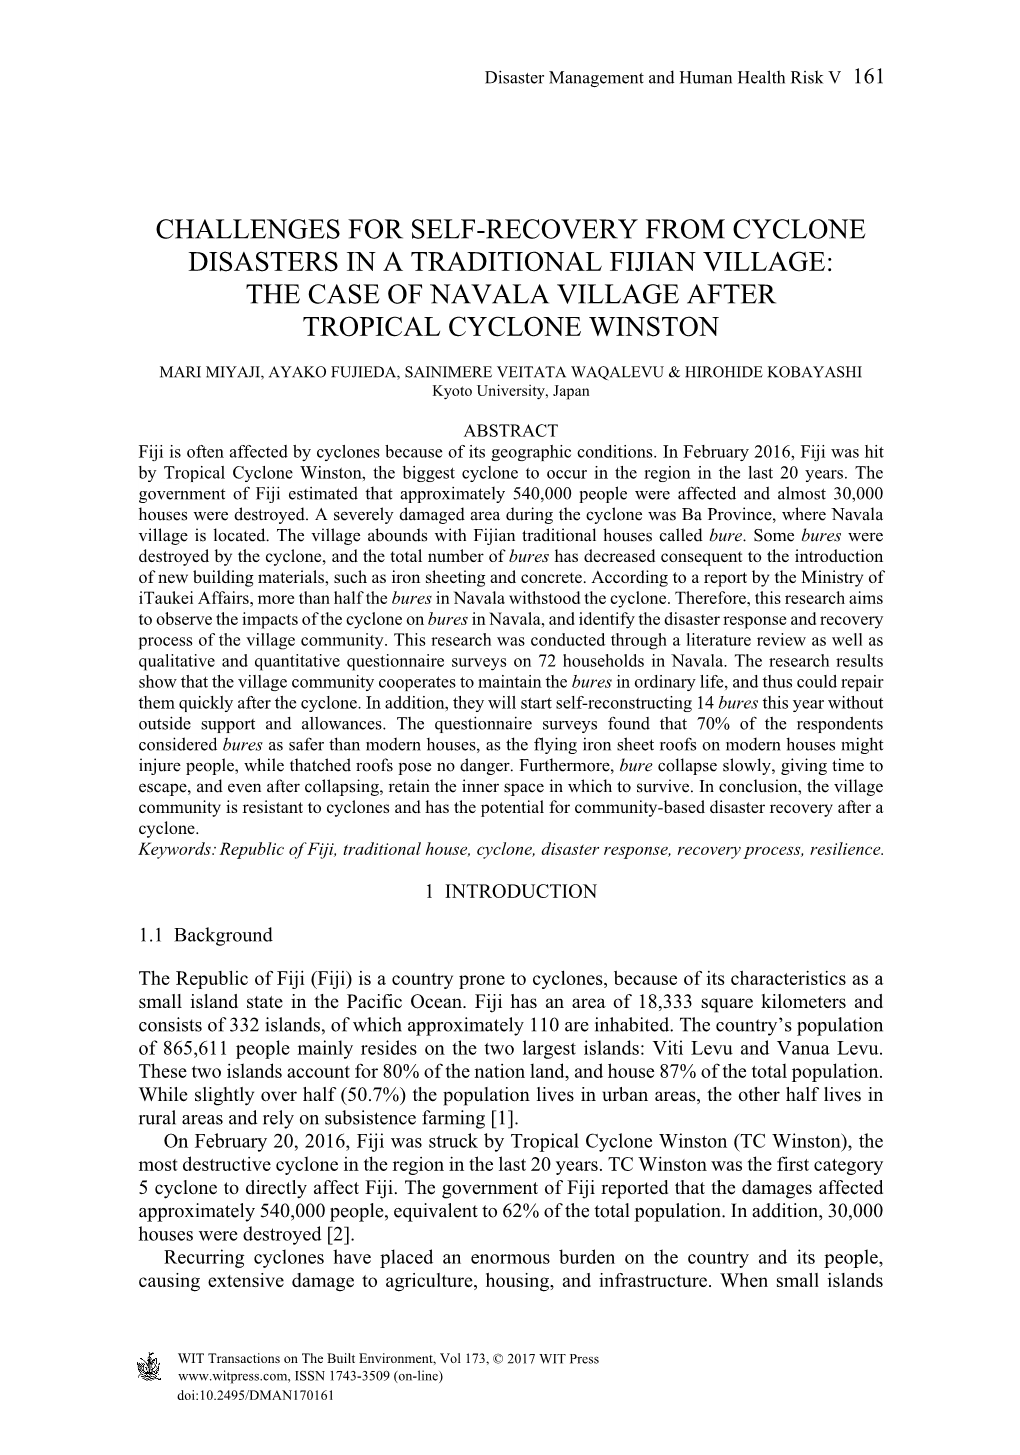 Challenges for Self-Recovery from Cyclone Disasters in a Traditional Fijian Village: the Case of Navala Village After Tropical Cyclone Winston